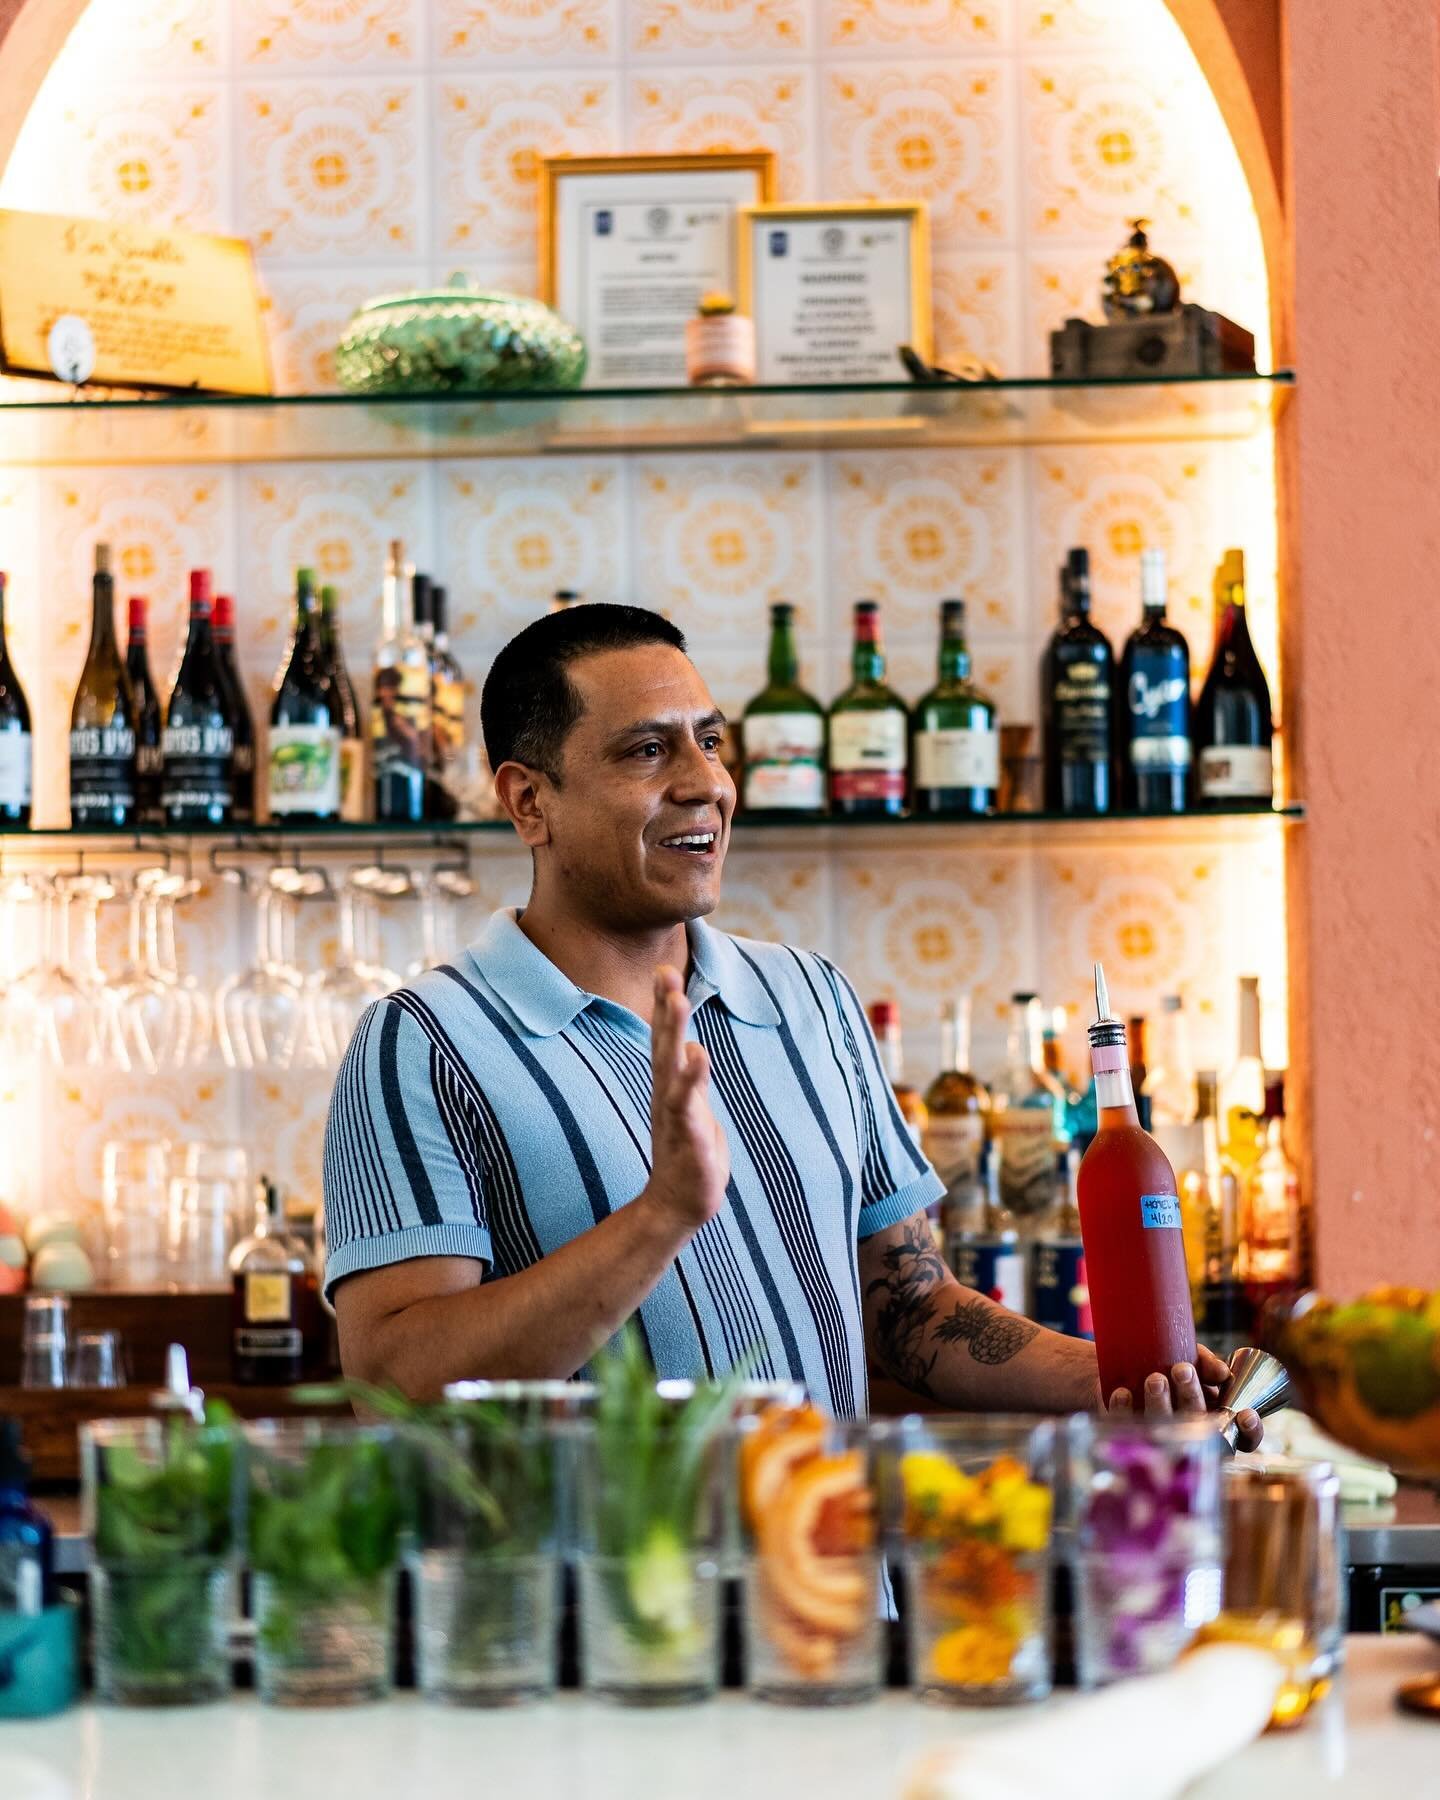 Meet @orestesmixdrinks , our new superstar bar manager and world-class mixologist! We&rsquo;re thrilled to have him join our team and his cocktails grace our menu. ⁠✨🍹
⁠
𝘍𝘙𝘖𝘔: Mexico City/New Orleans⁠
𝘊𝘜𝘙𝘙𝘌𝘕𝘛 𝘏𝘖𝘖𝘋: Oakland City, Atlan